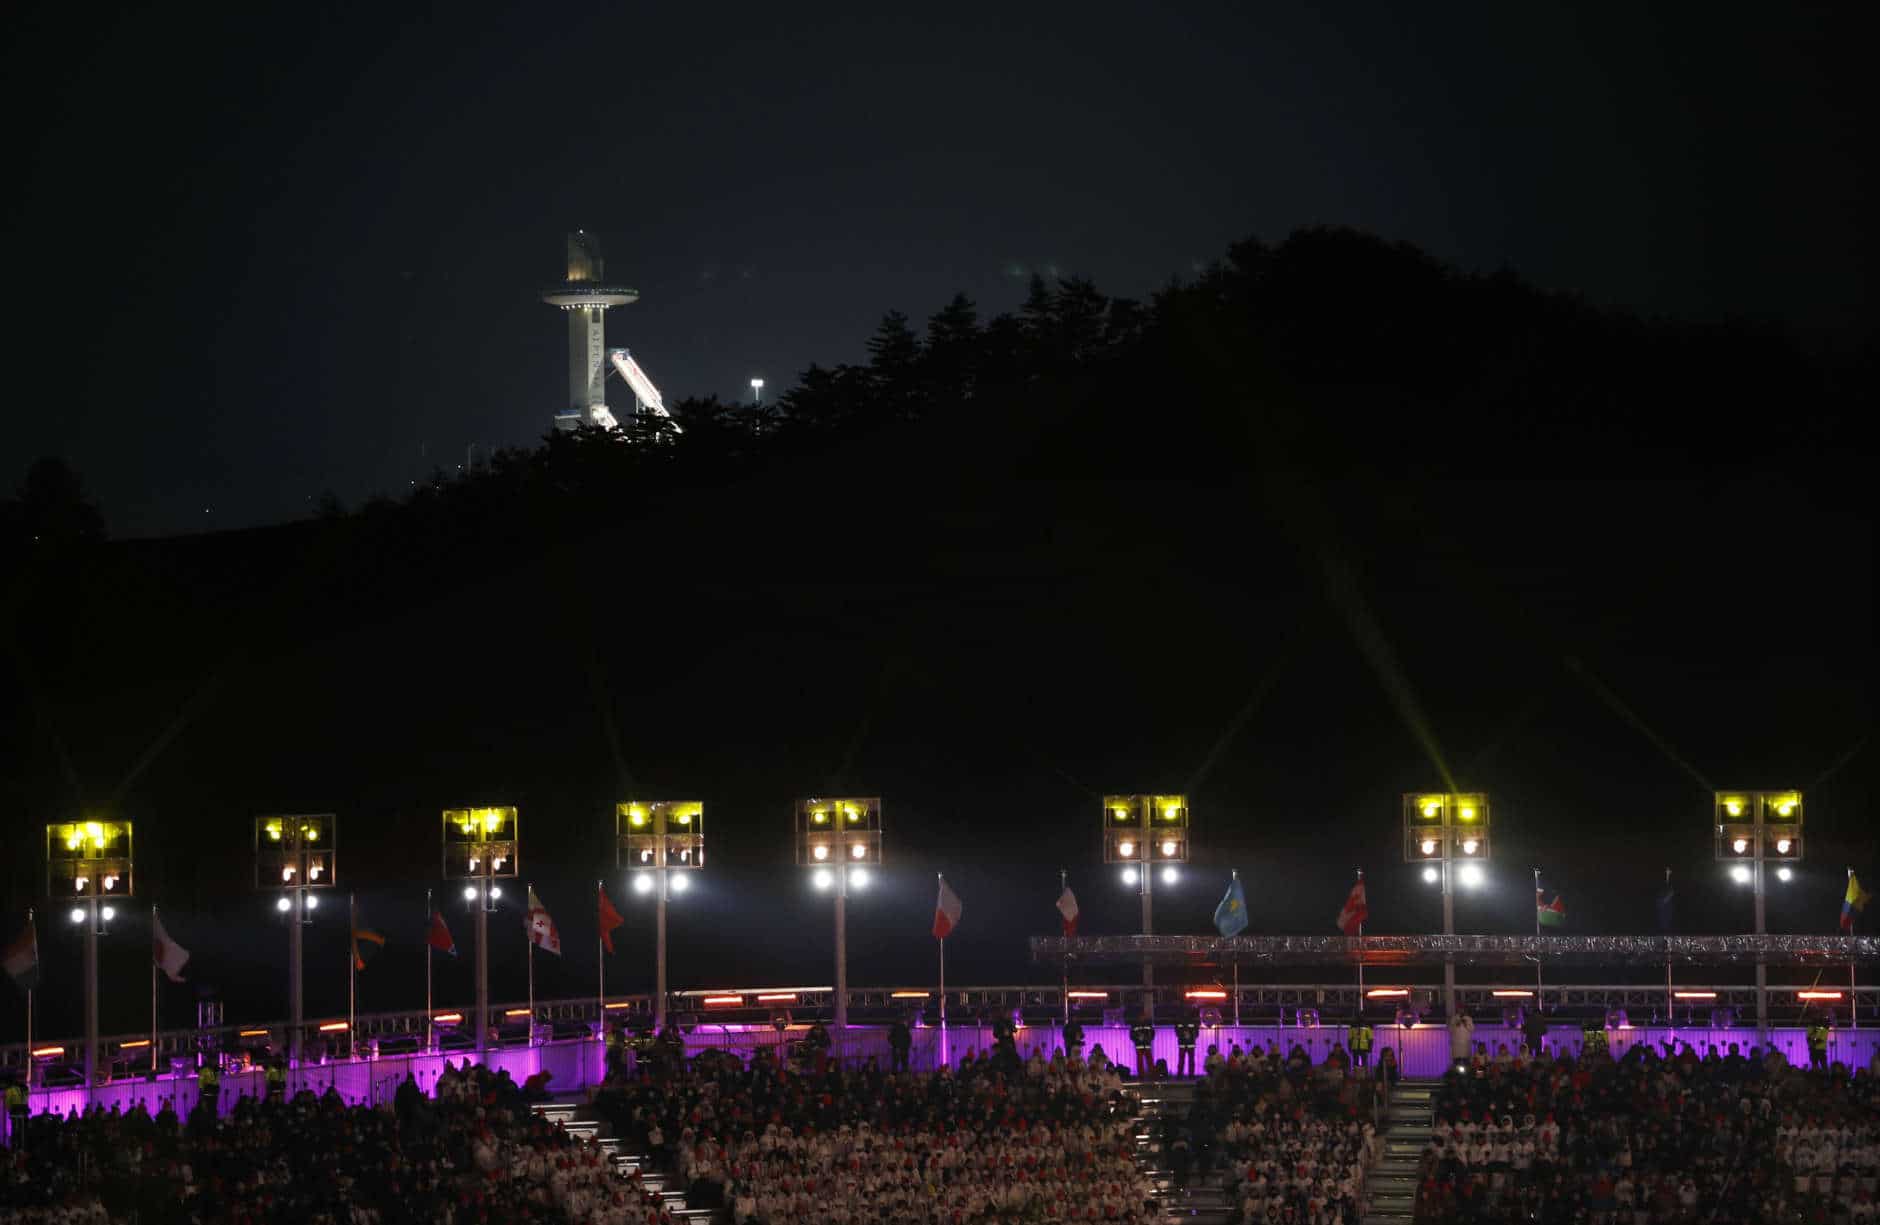 The Alpensia Ski Jumping Center towers are illuminated in the background while people attend the closing ceremony of the 2018 Winter Olympics in Pyeongchang, South Korea, Sunday, Feb. 25, 2018. (AP Photo/Charlie Riedel)